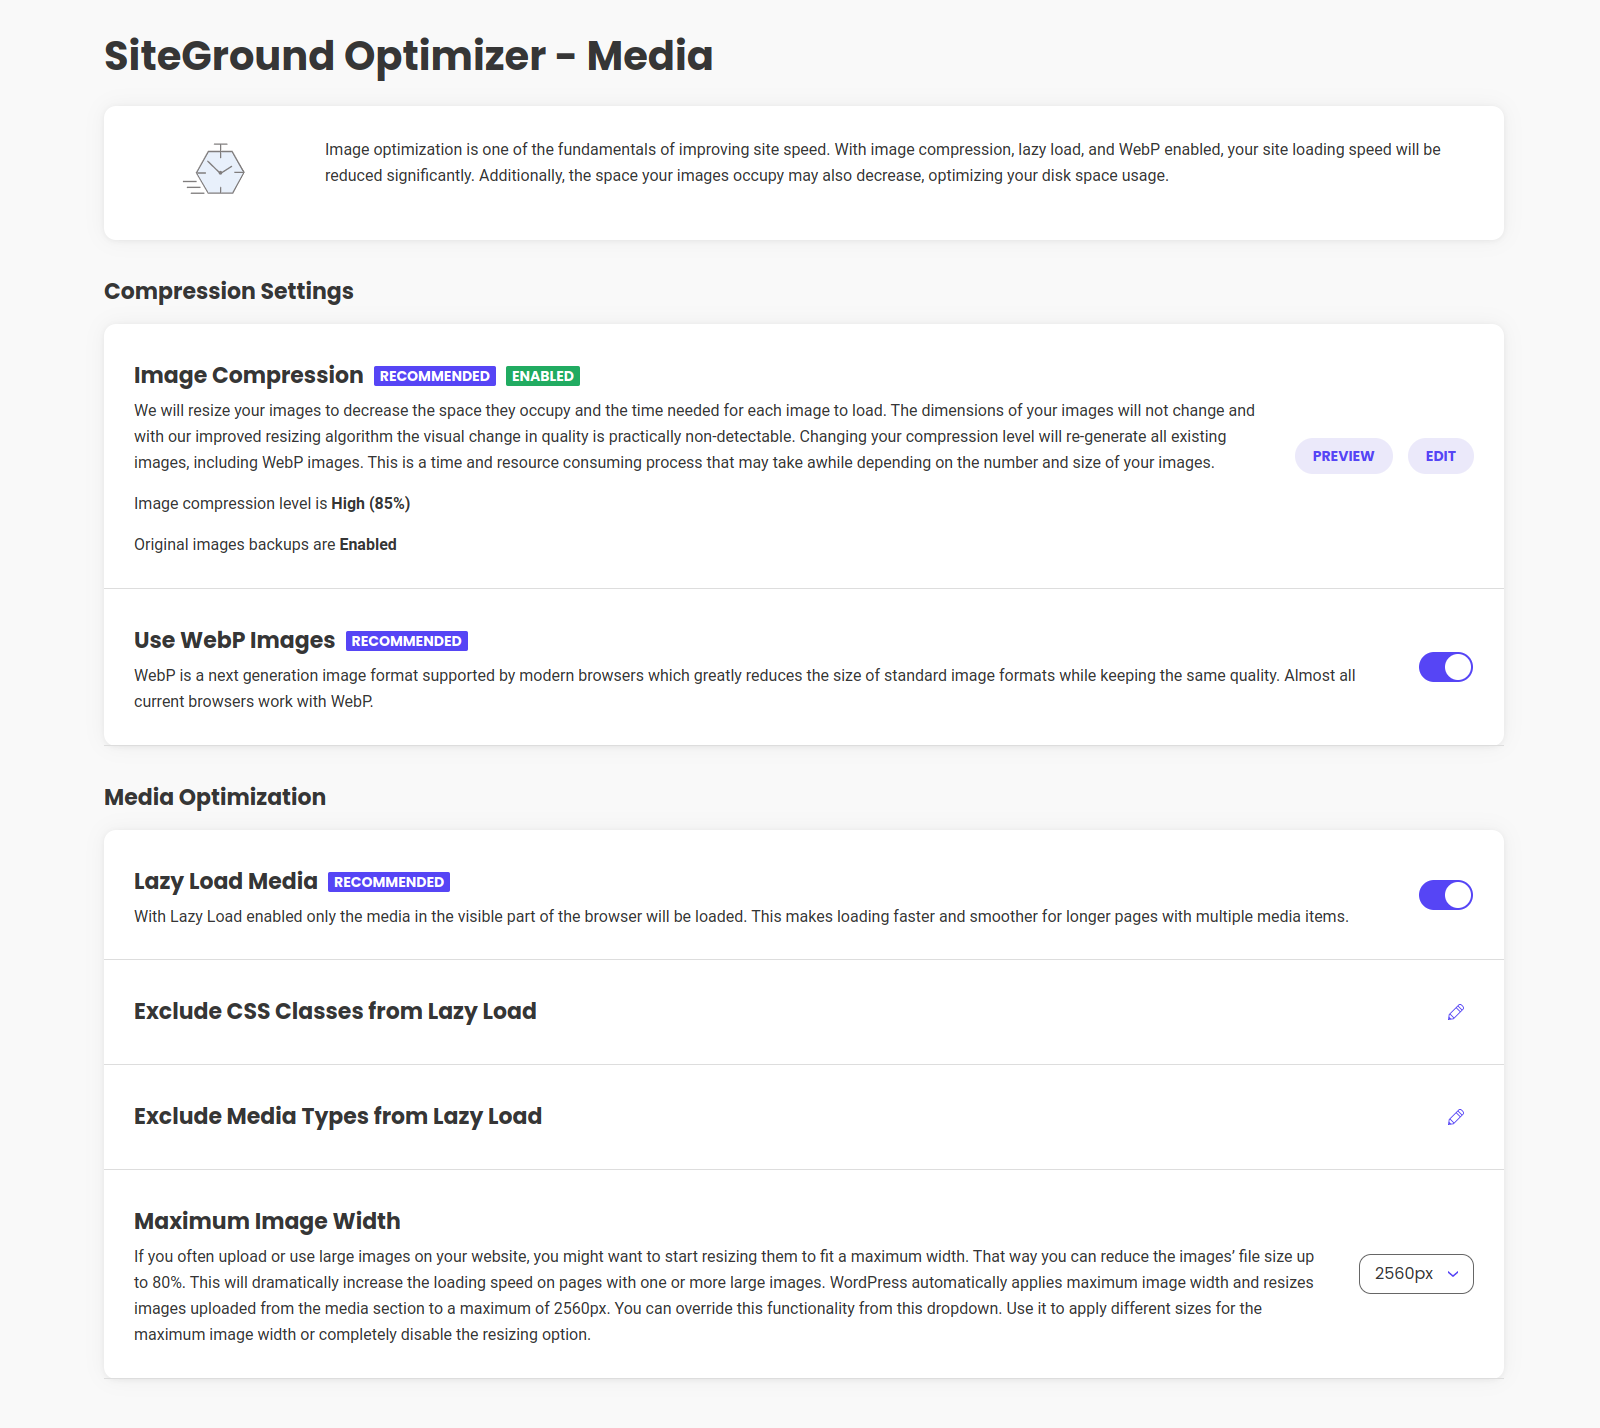 The SiteGround Optimizer Media Page allows you to optimize your Media Library images, as well as adds Lazy Loading functionality for your site.